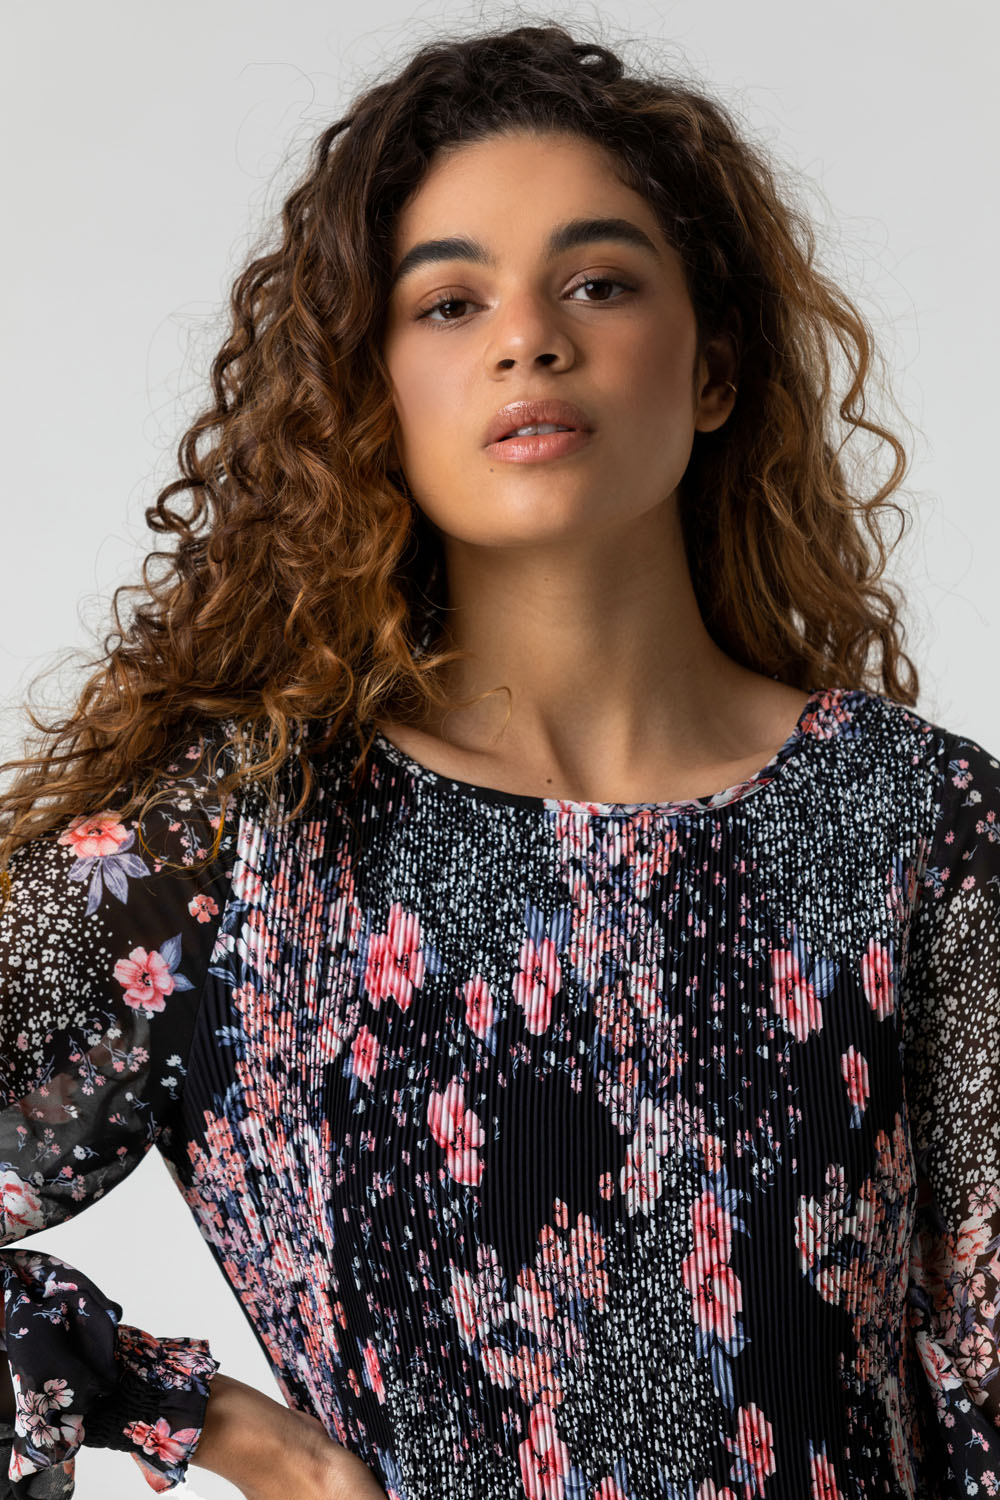 PINK Floral Print Pleated Top, Image 4 of 4